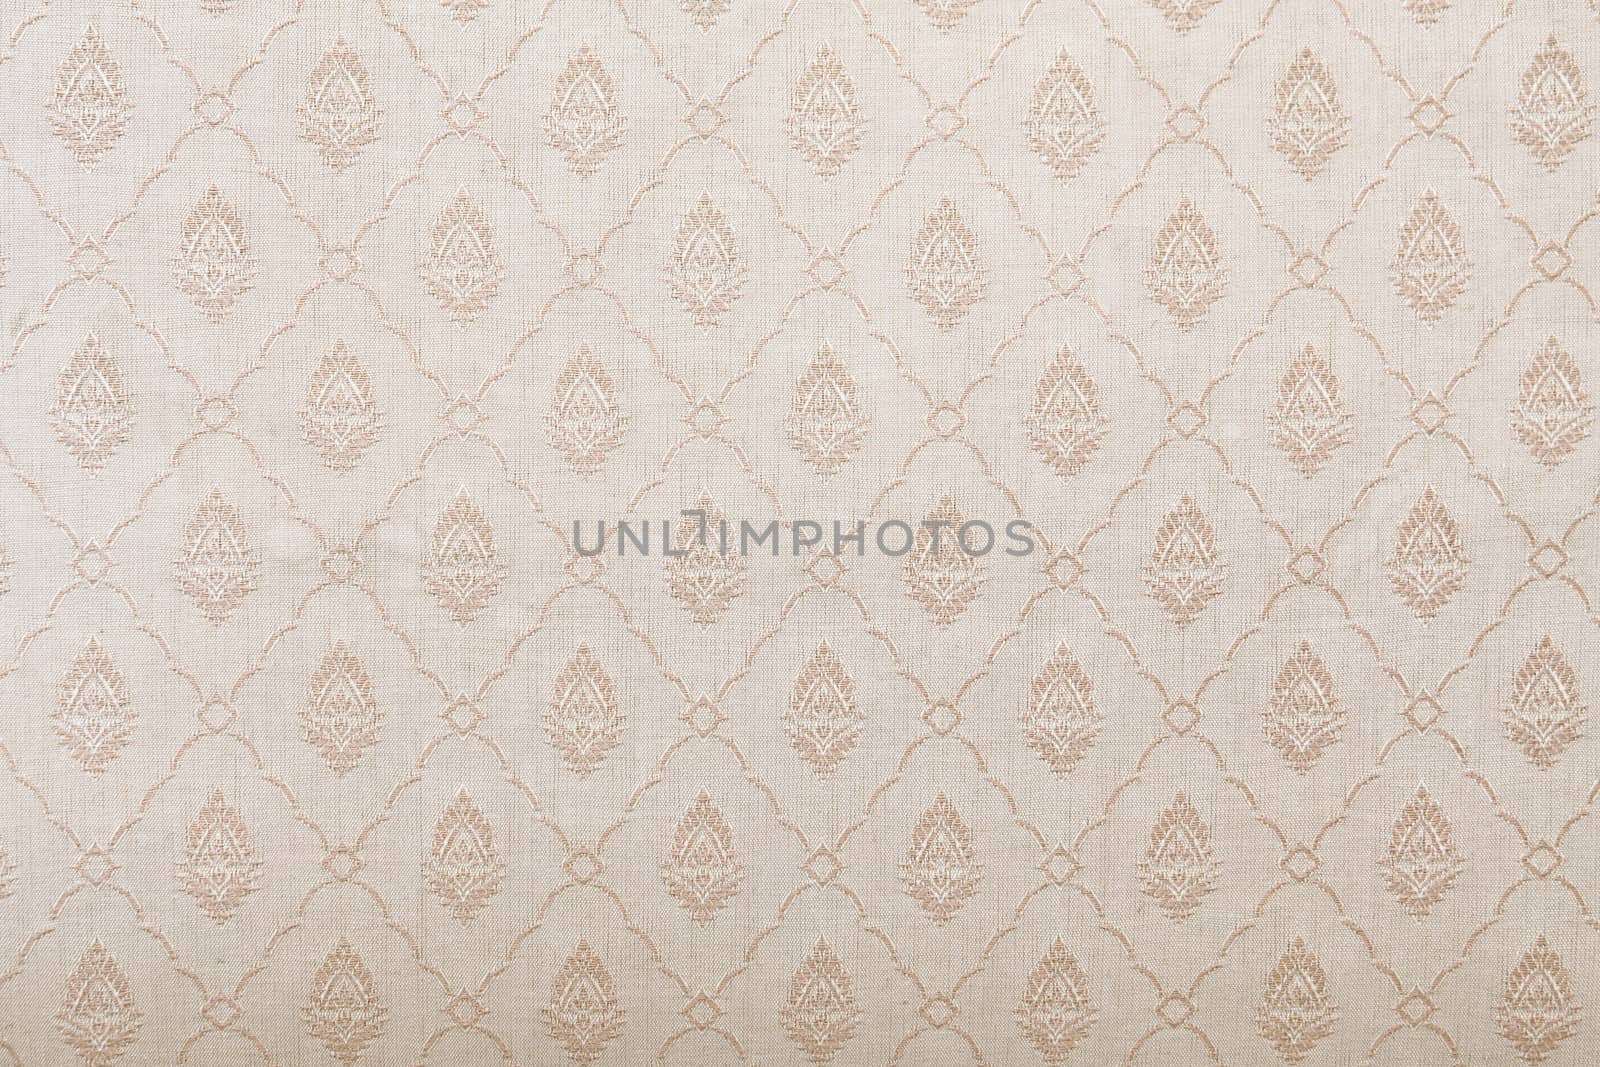 Retro cloth pattern as a background image